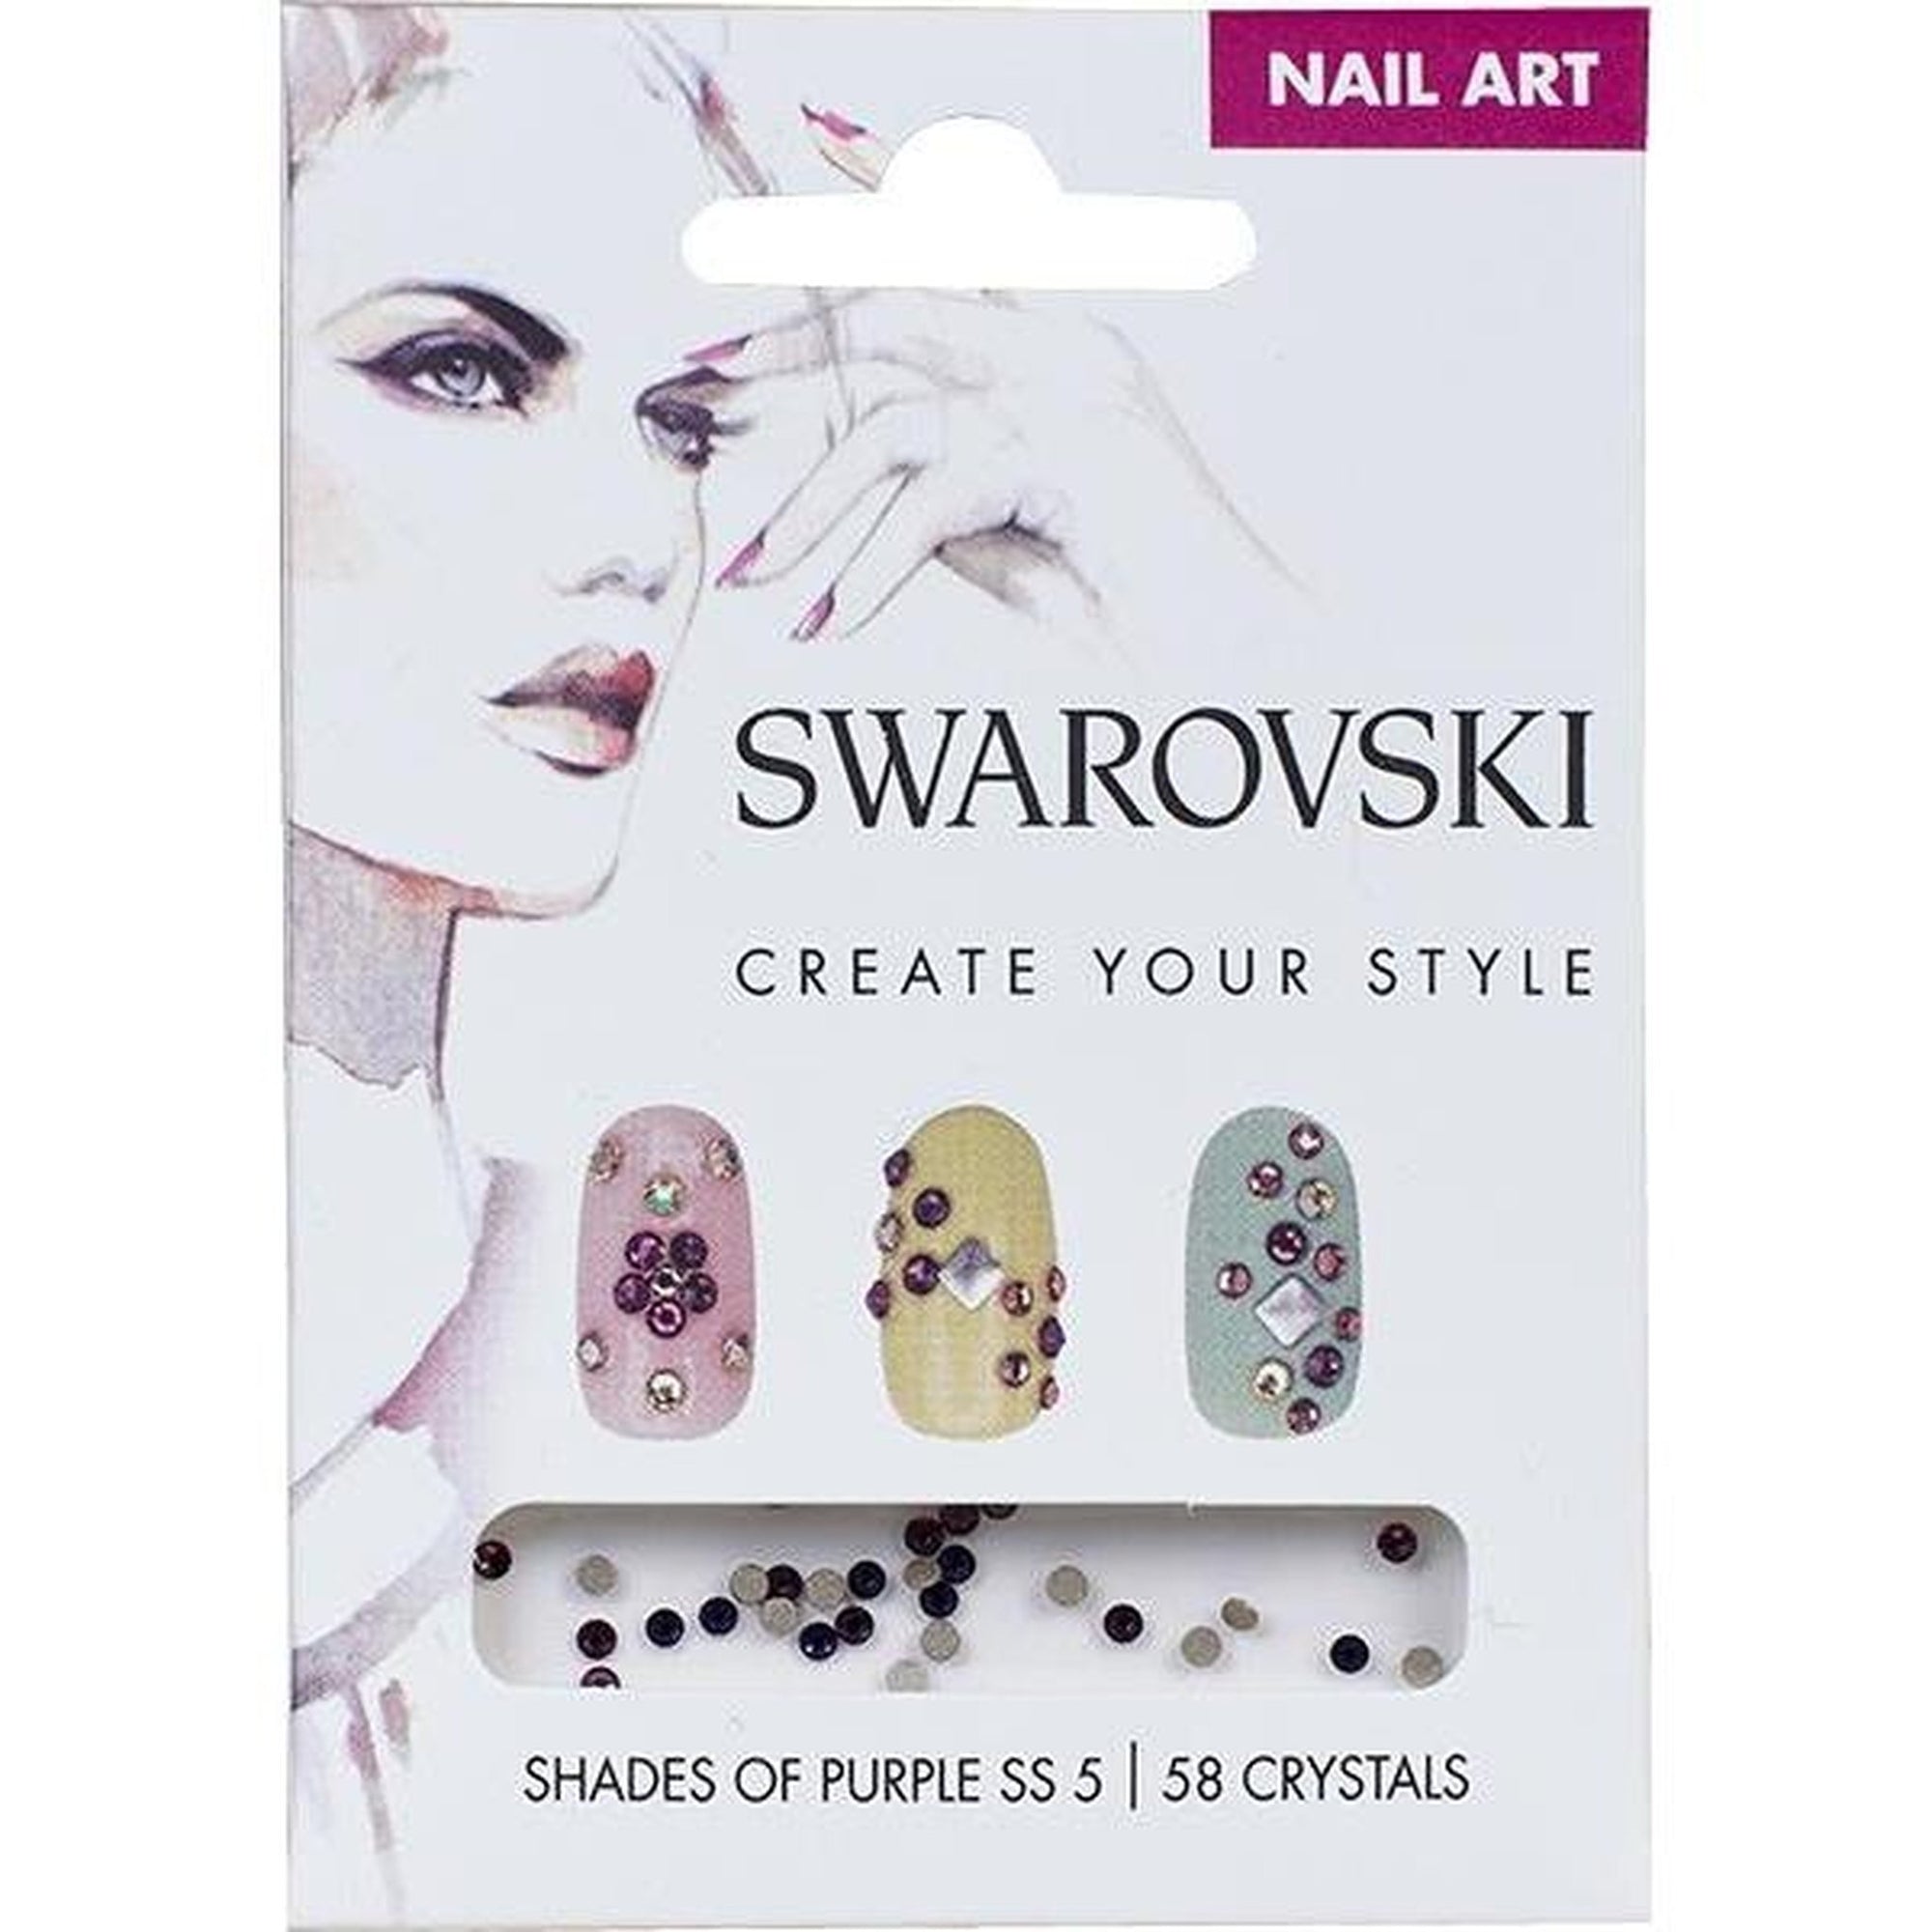 We All Heart Nail Art! Tips For Accessorizing Nails with Swarovski Crystals  - Rainbows of Light.com, Inc.